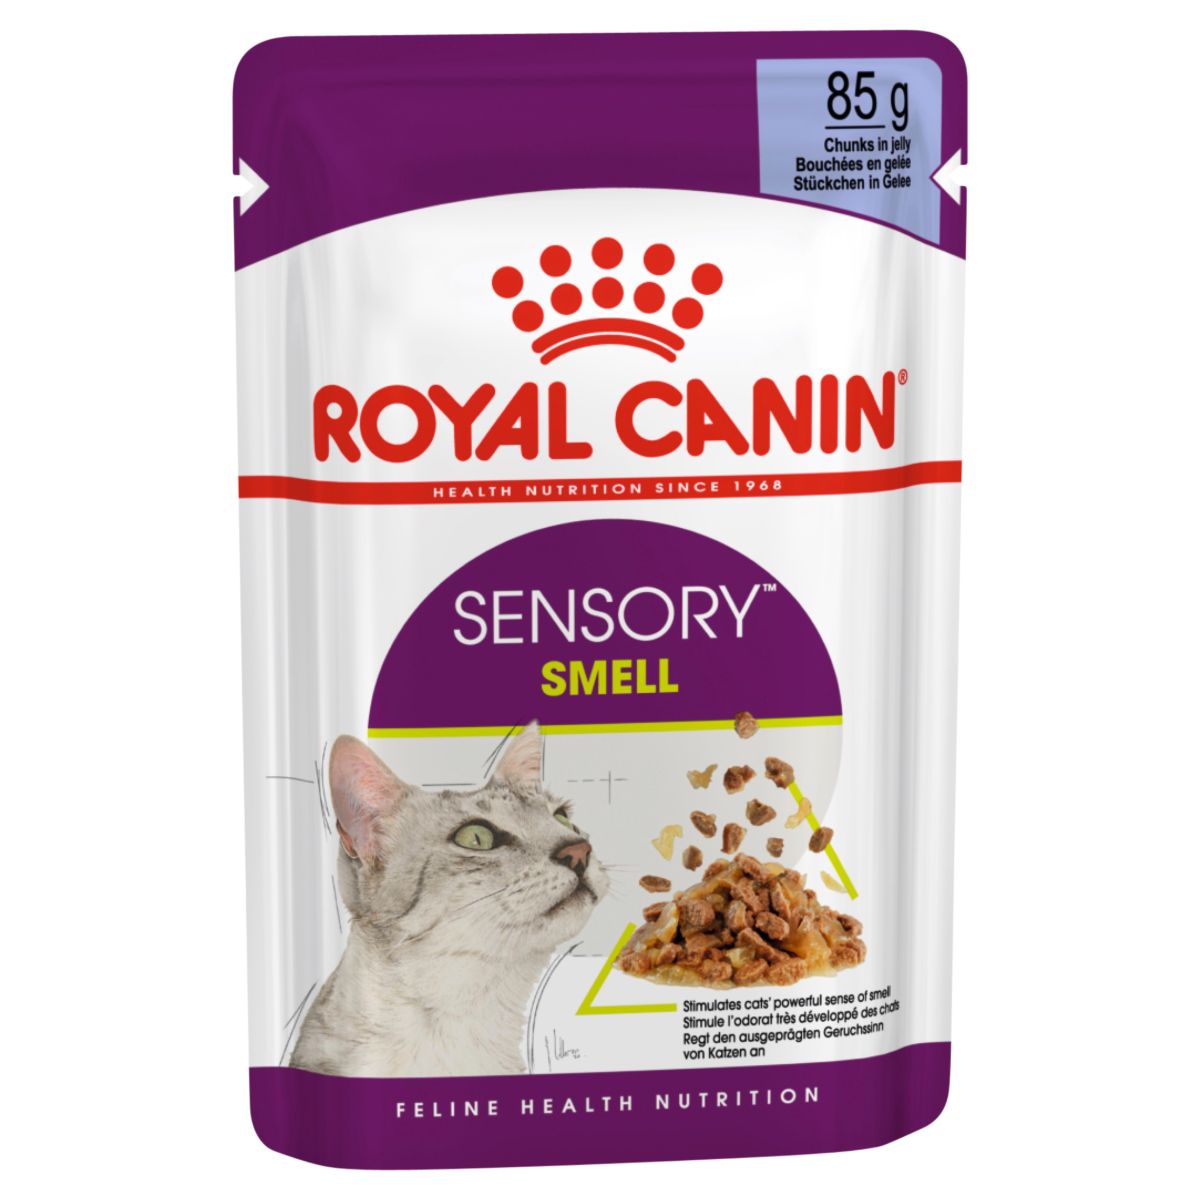 Royal Canin Sensory Smell Chunks in Jelly Wet Cat Food 85G